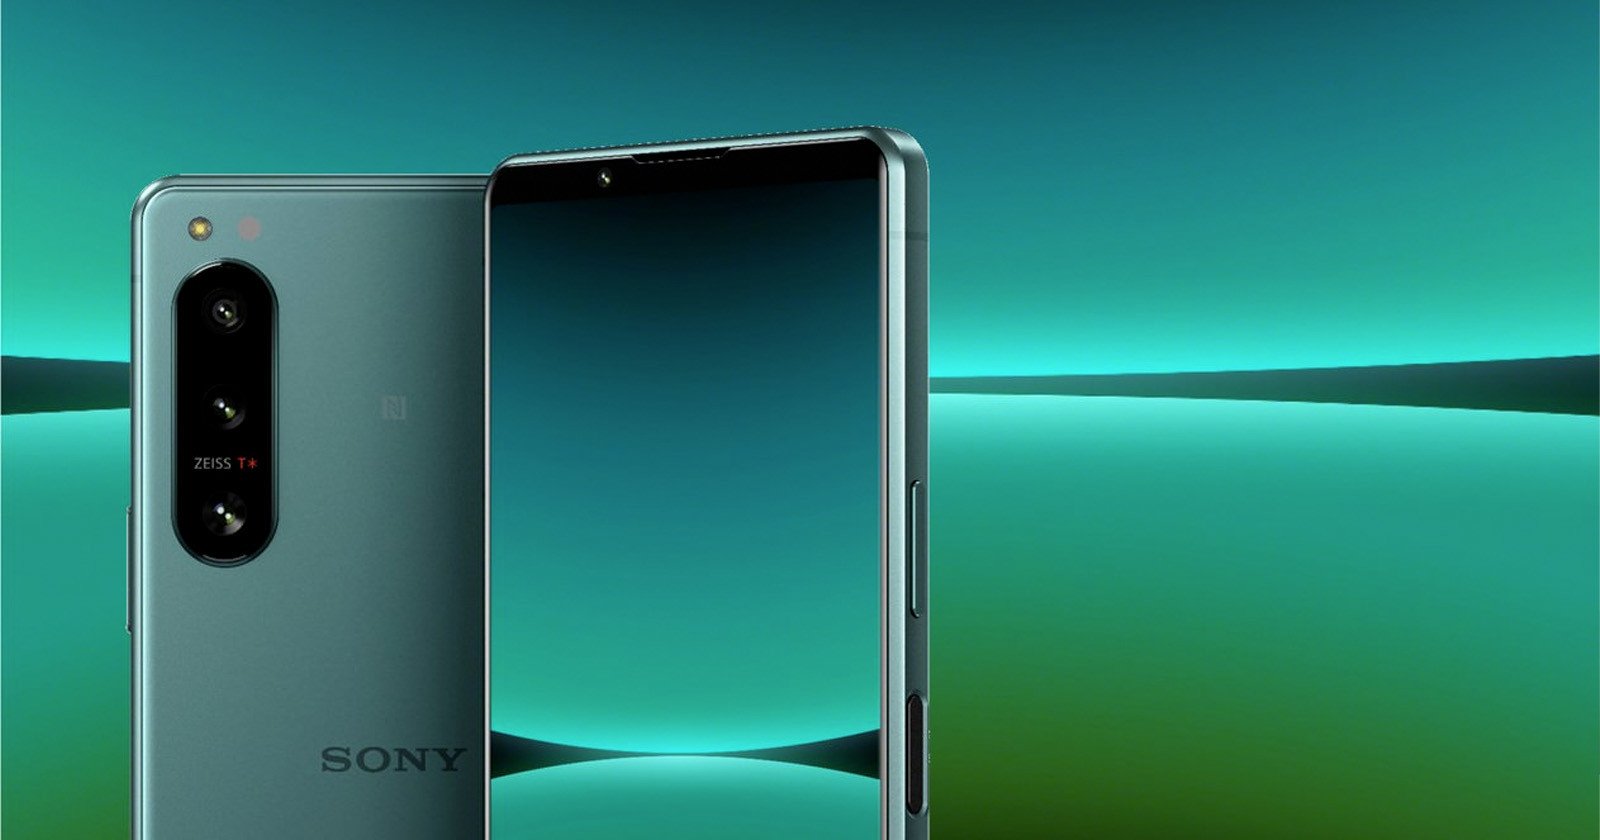  sony xperia compact phone flagship features 